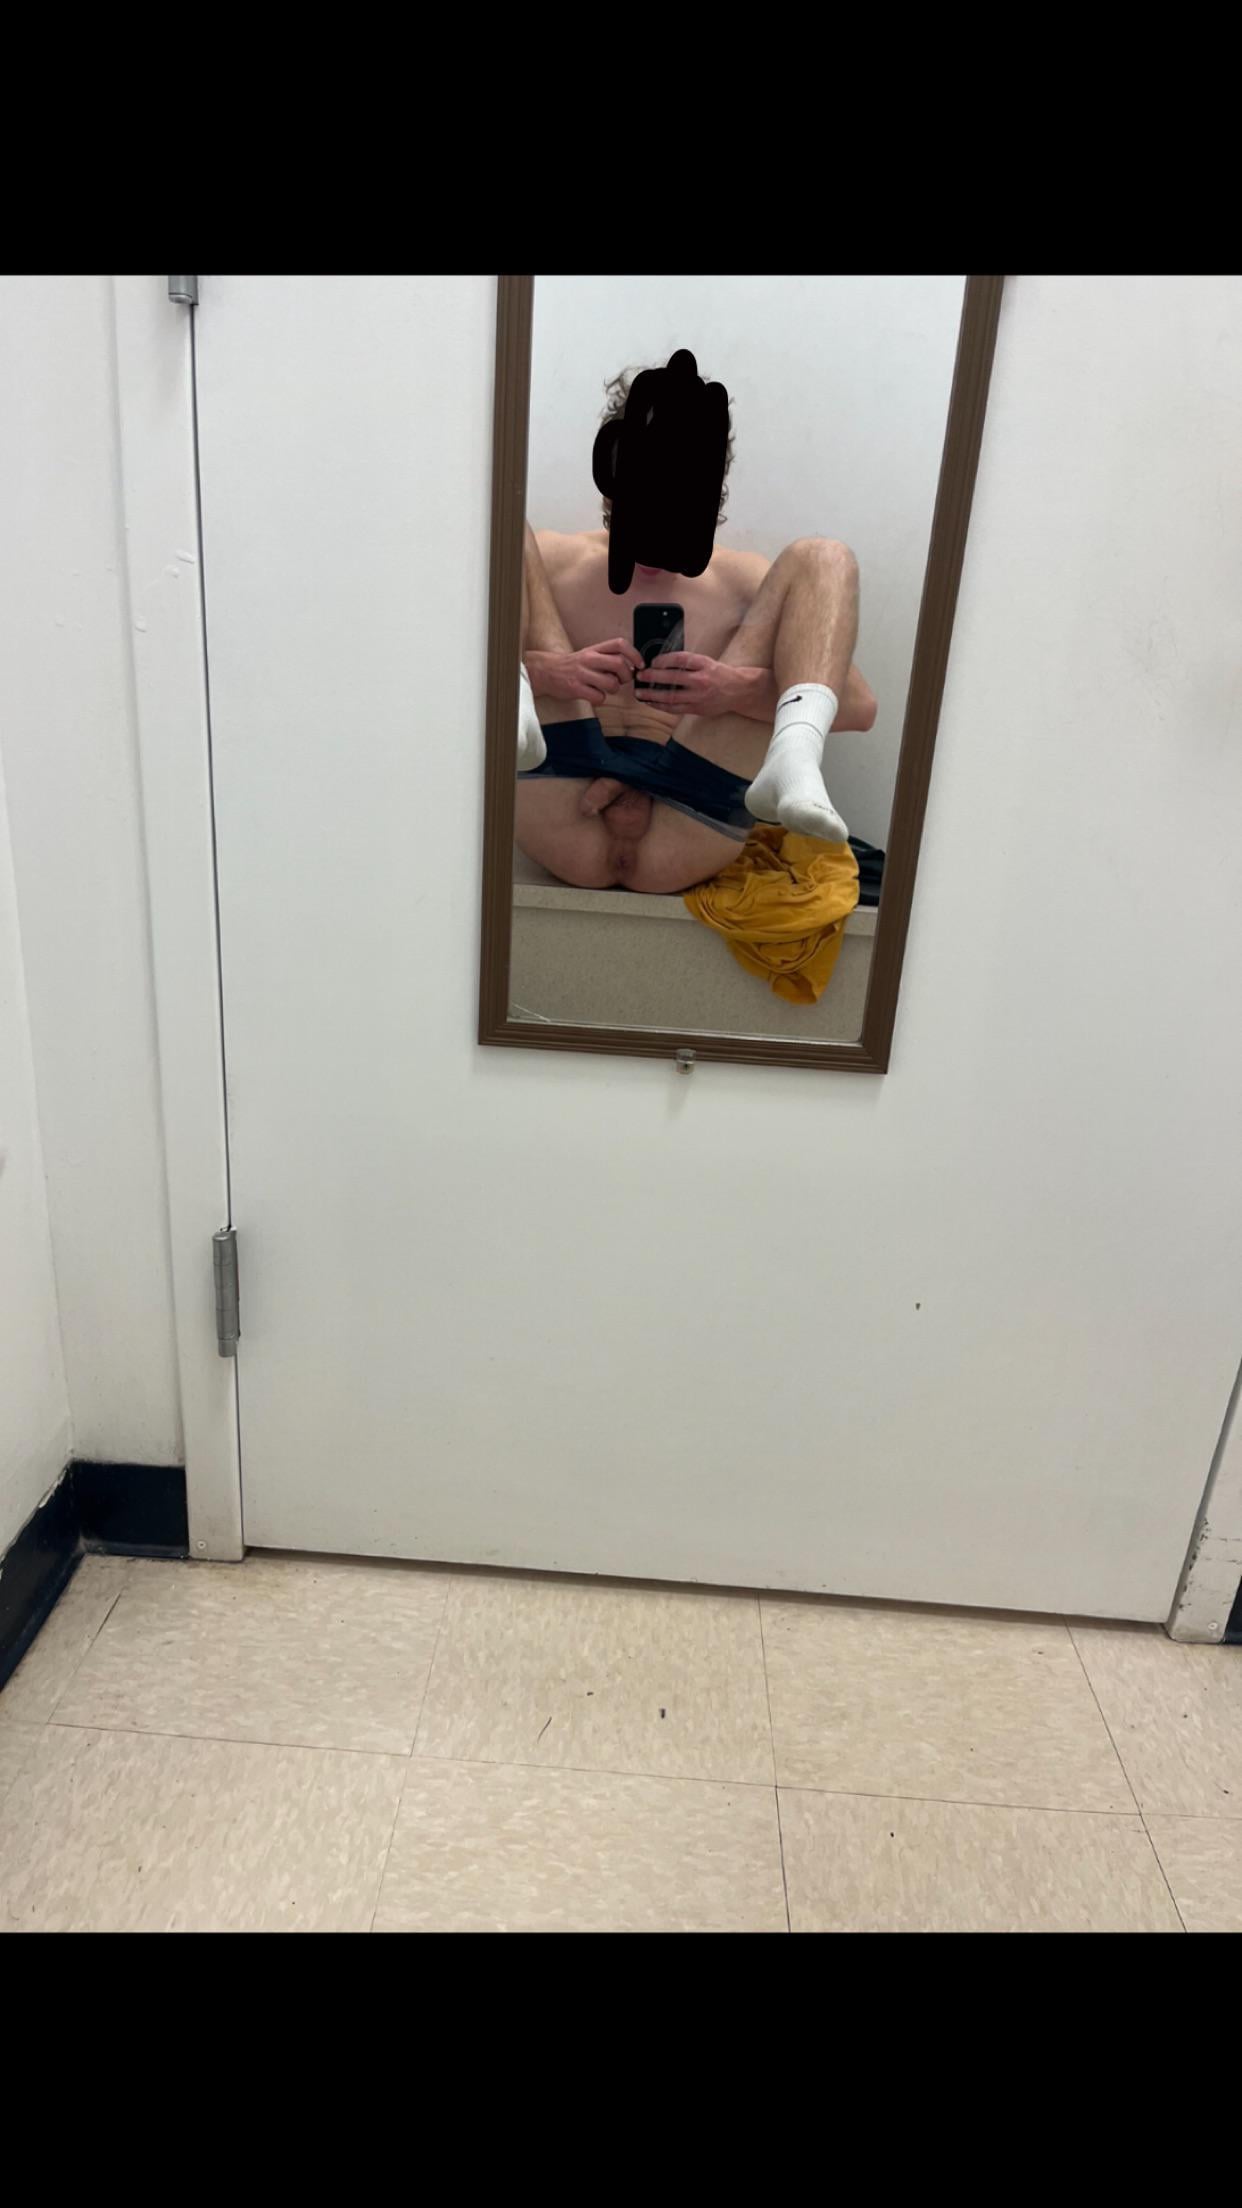 horny in the fitting room